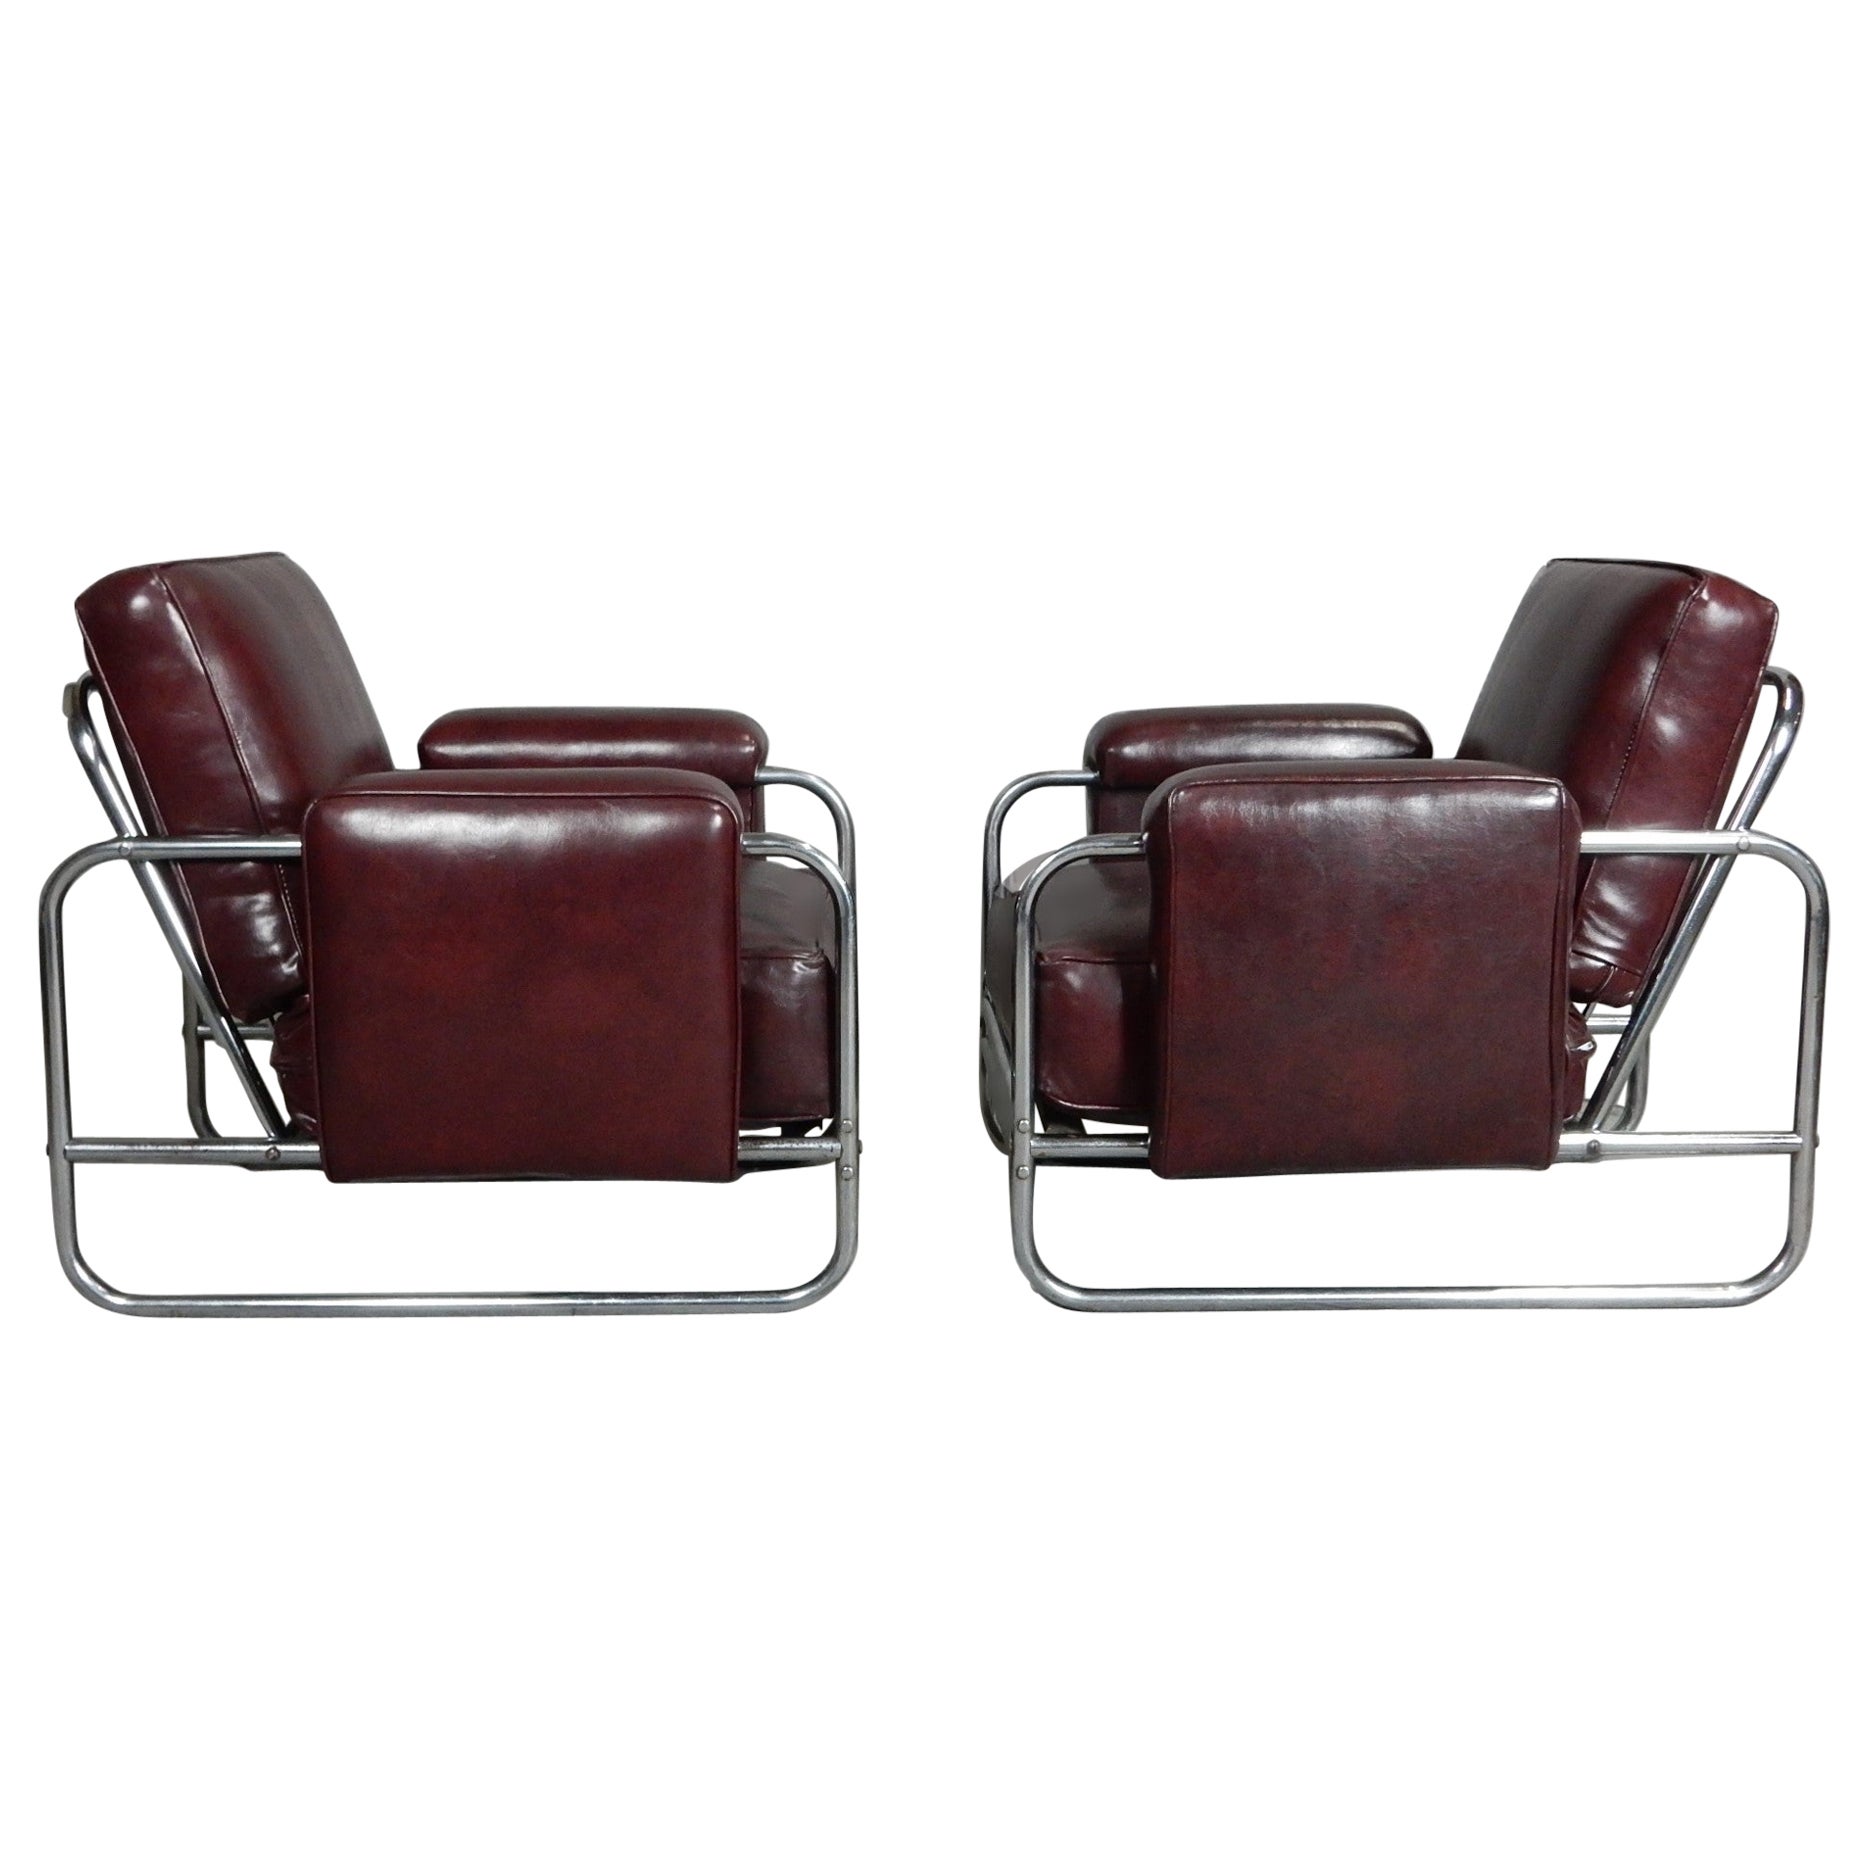 Machine age Industrial Nickel Plated Steel Lounge Chairs For Sale